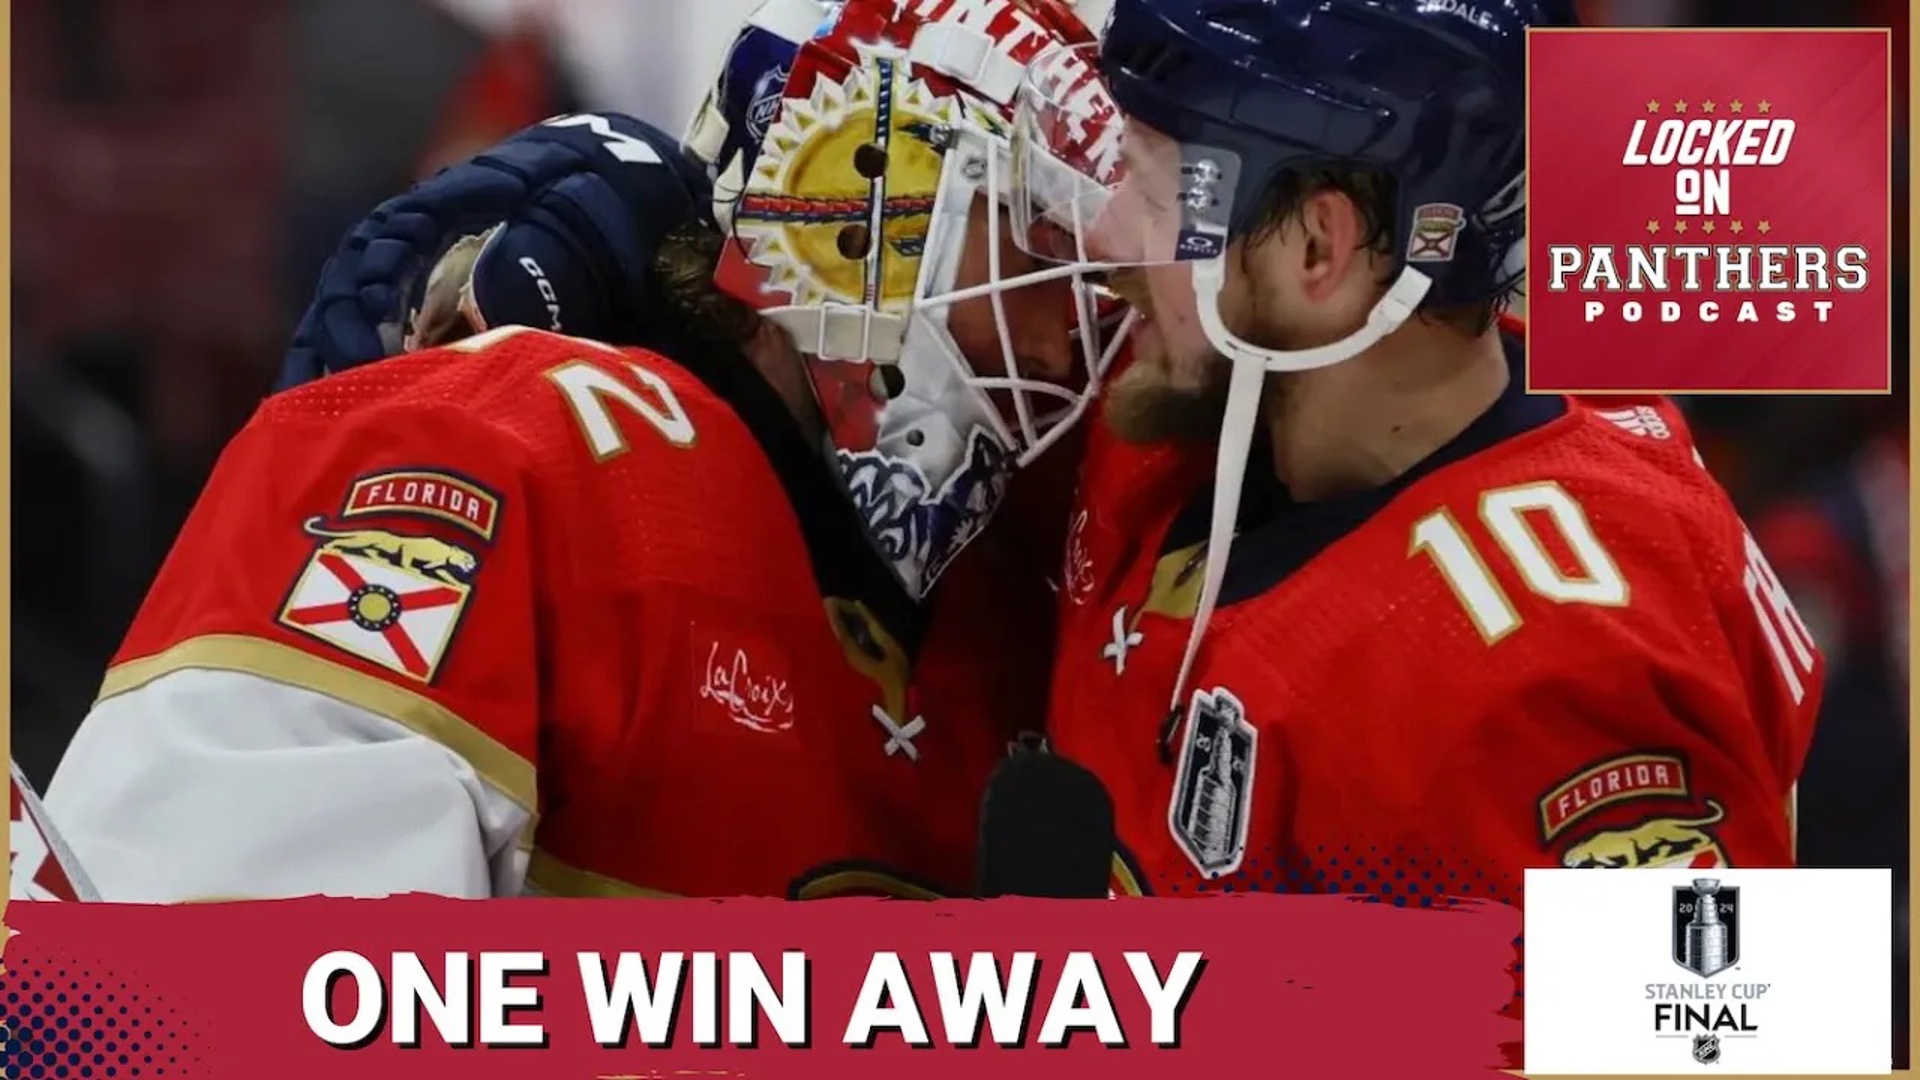 The Florida Panthers are one win away from winning the Stanley Cup. Nich Fairbanks joins to break down Game 3 in Edmonton.